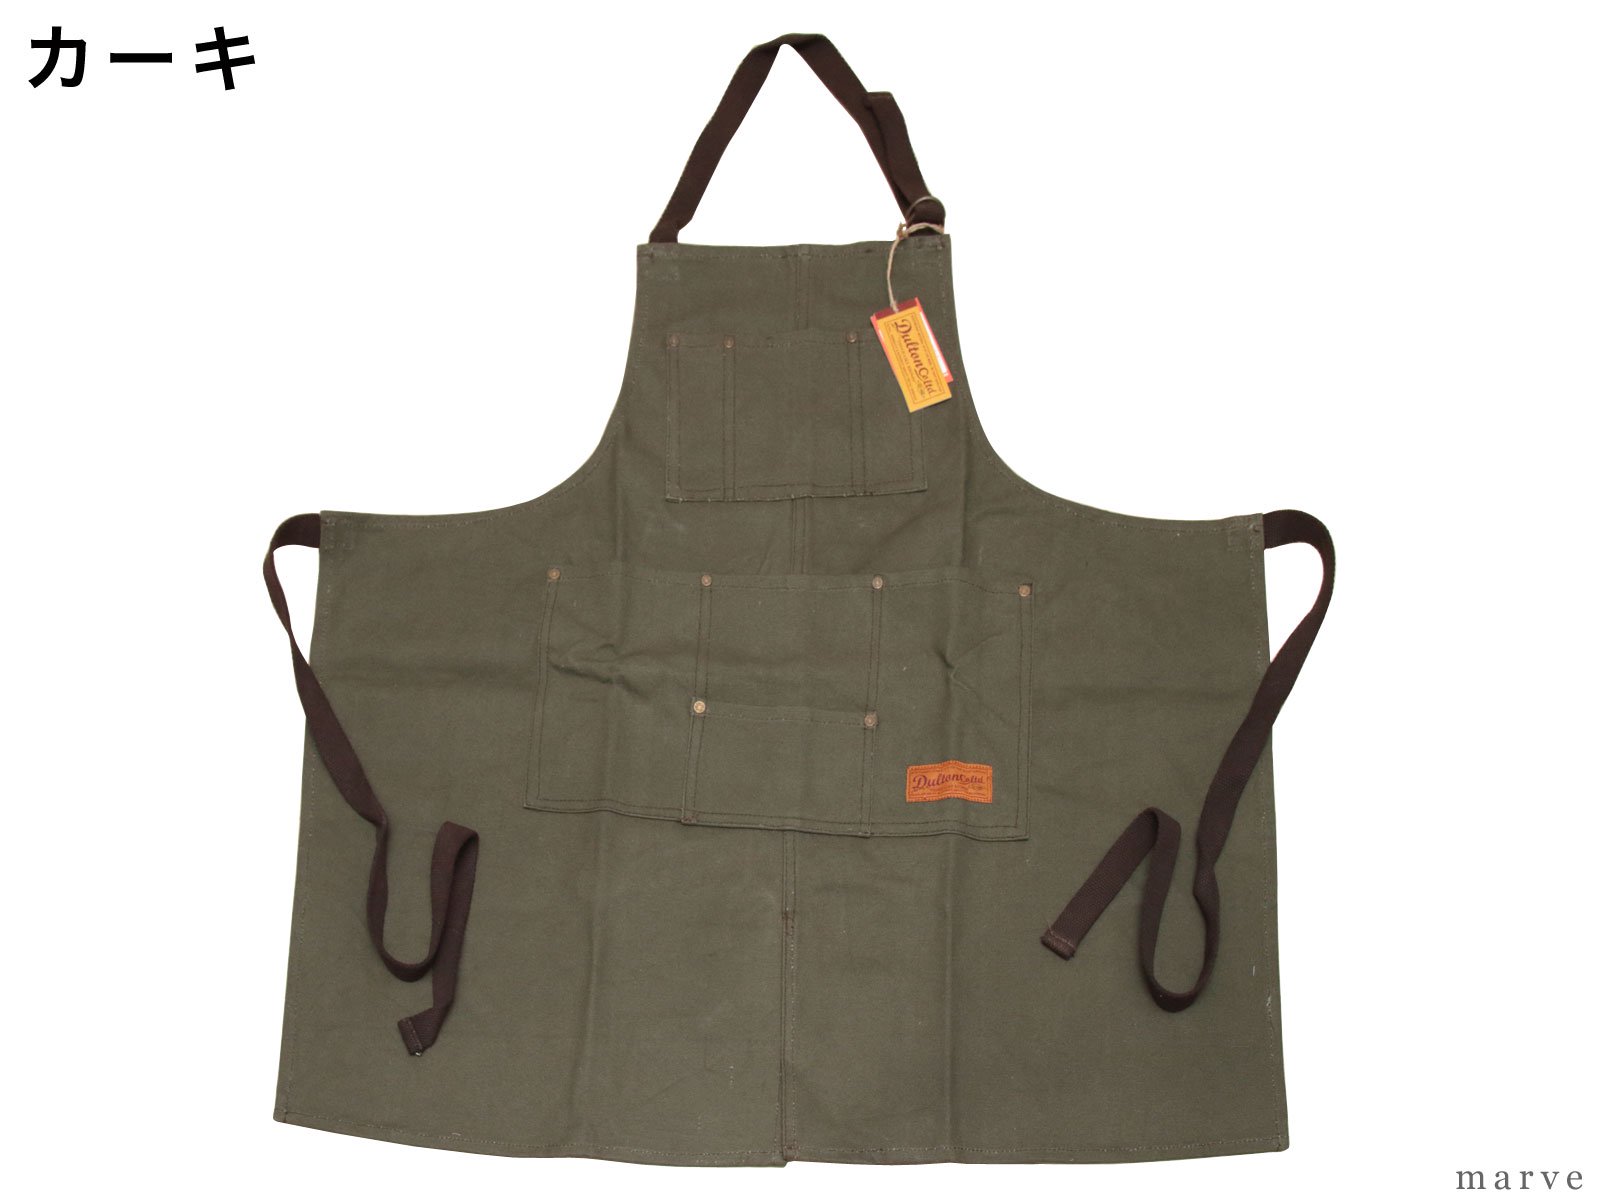 MW ワーク　エプロン（WORK APRON ）<img class='new_mark_img2' src='https://img.shop-pro.jp/img/new/icons16.gif' style='border:none;display:inline;margin:0px;padding:0px;width:auto;' />